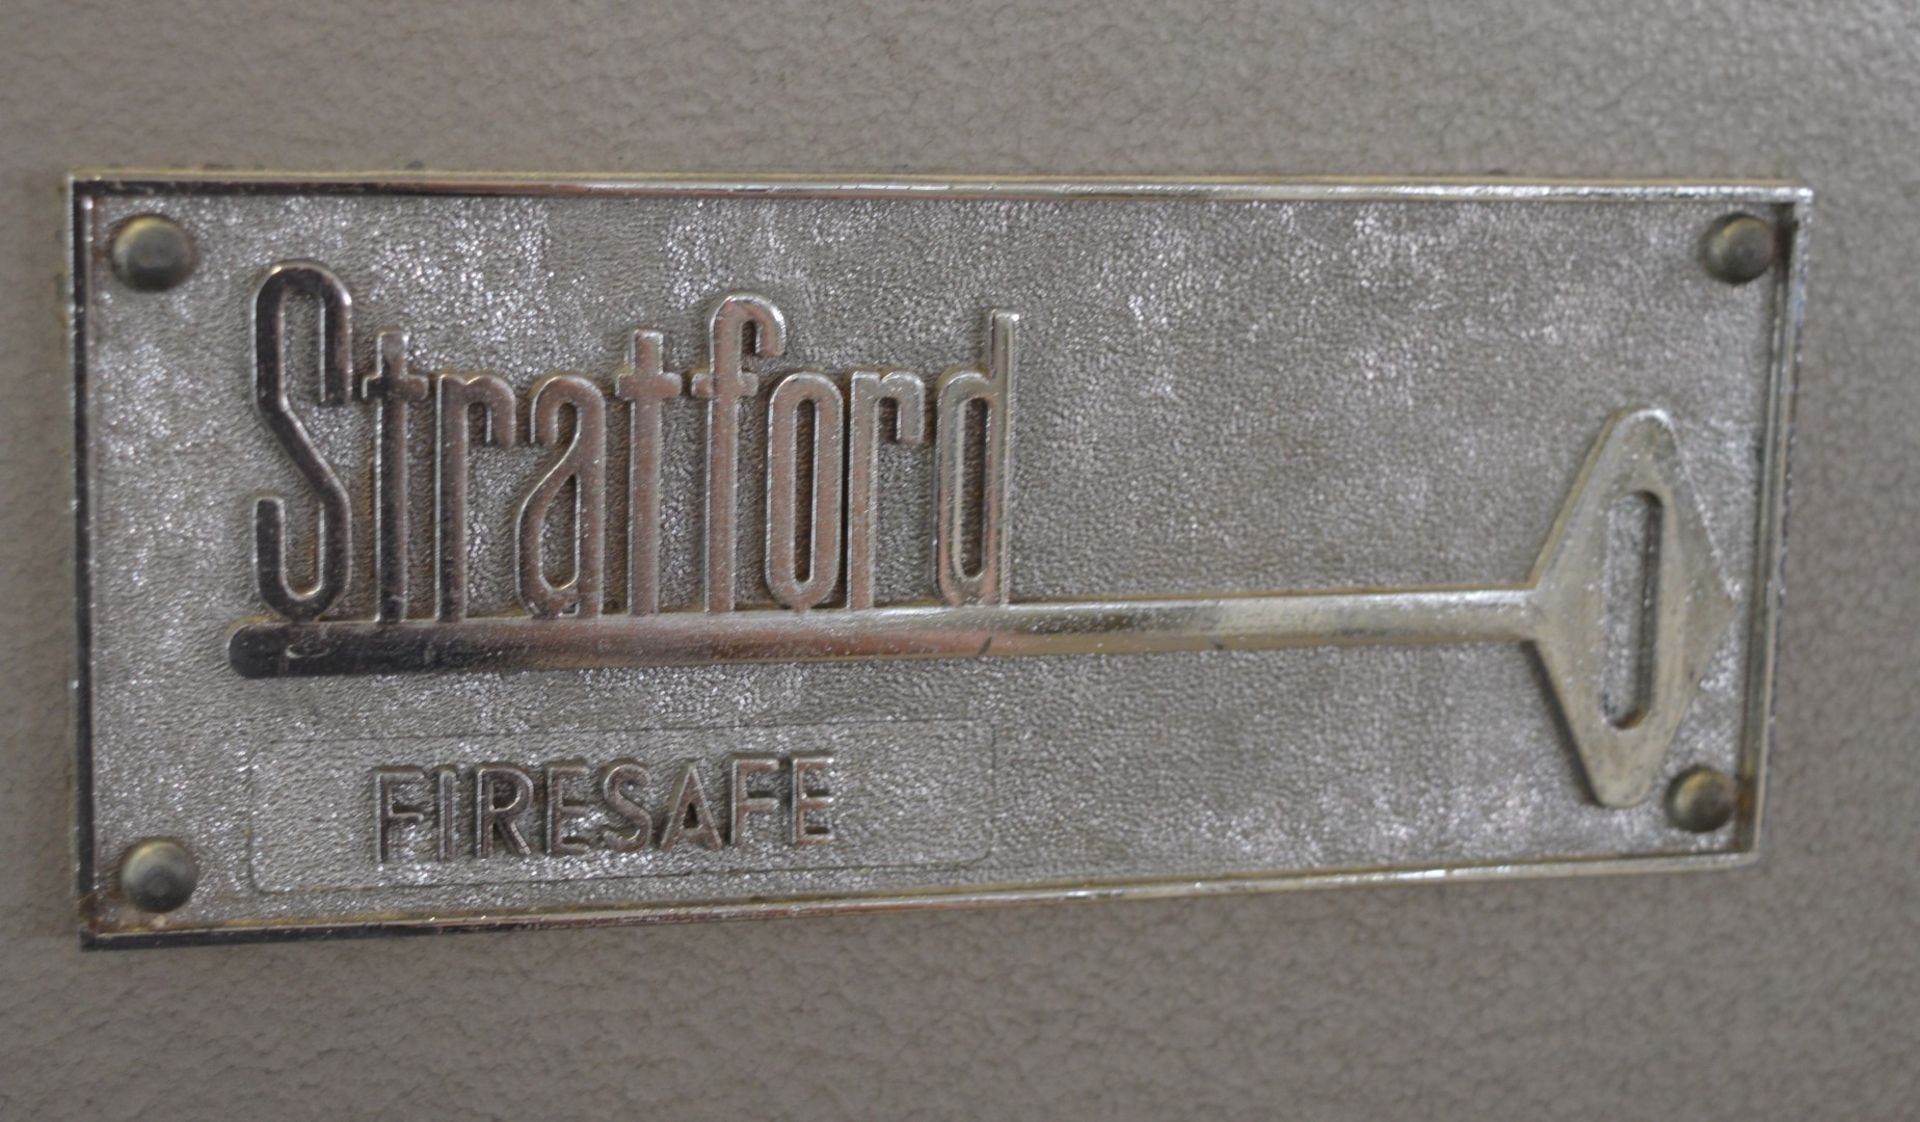 1 x Stratford Heavy Duty Document Fire Safe - Large Size - Protect Important Documents, Valuables - Image 4 of 6